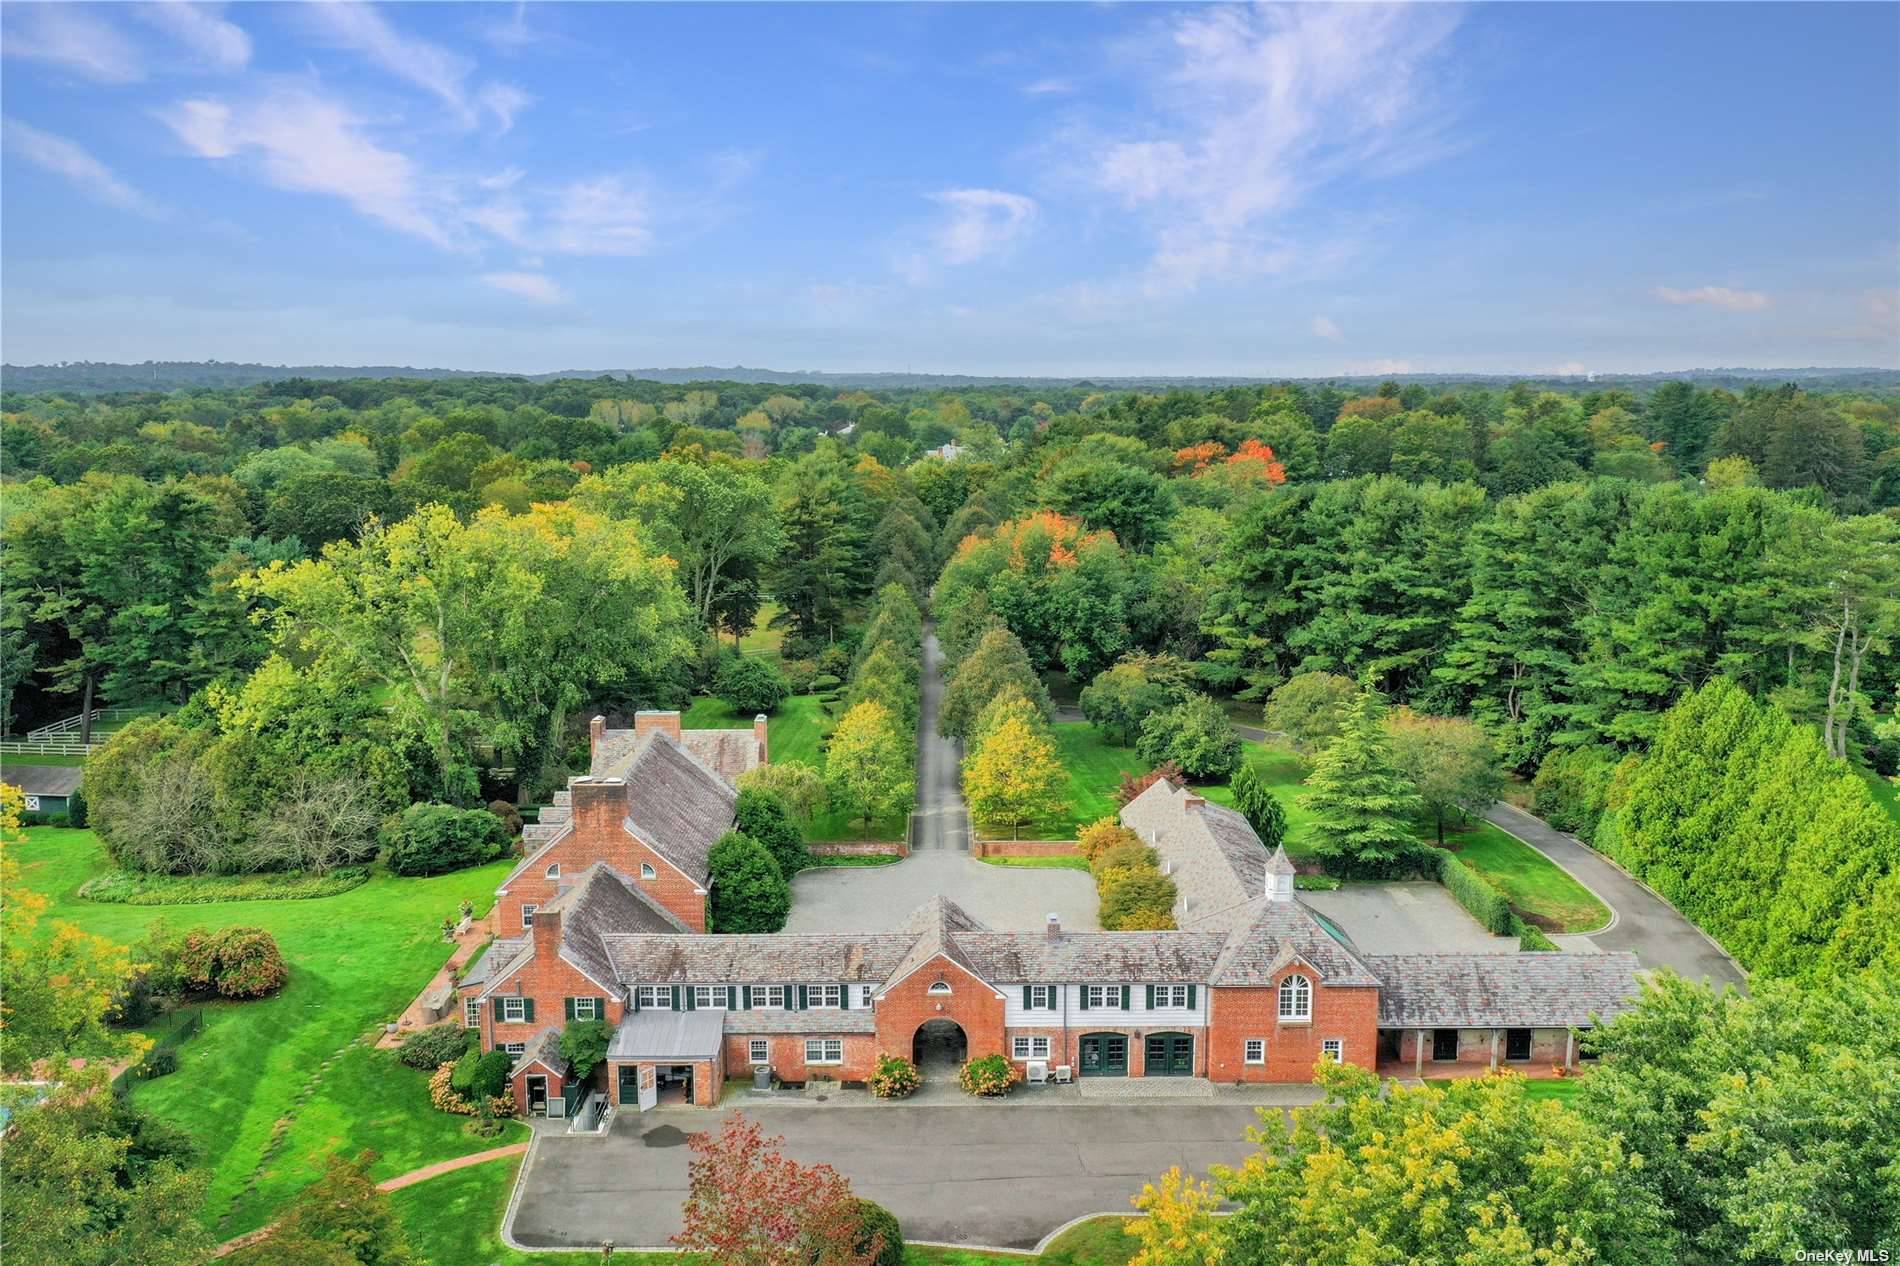 Avail for minimum of 6 months, 1 2 years GRAY HORSE FARM This magnificent iconic estate on desirable Piping Rock Road is situated on 9 flat acres and offers 13, ...